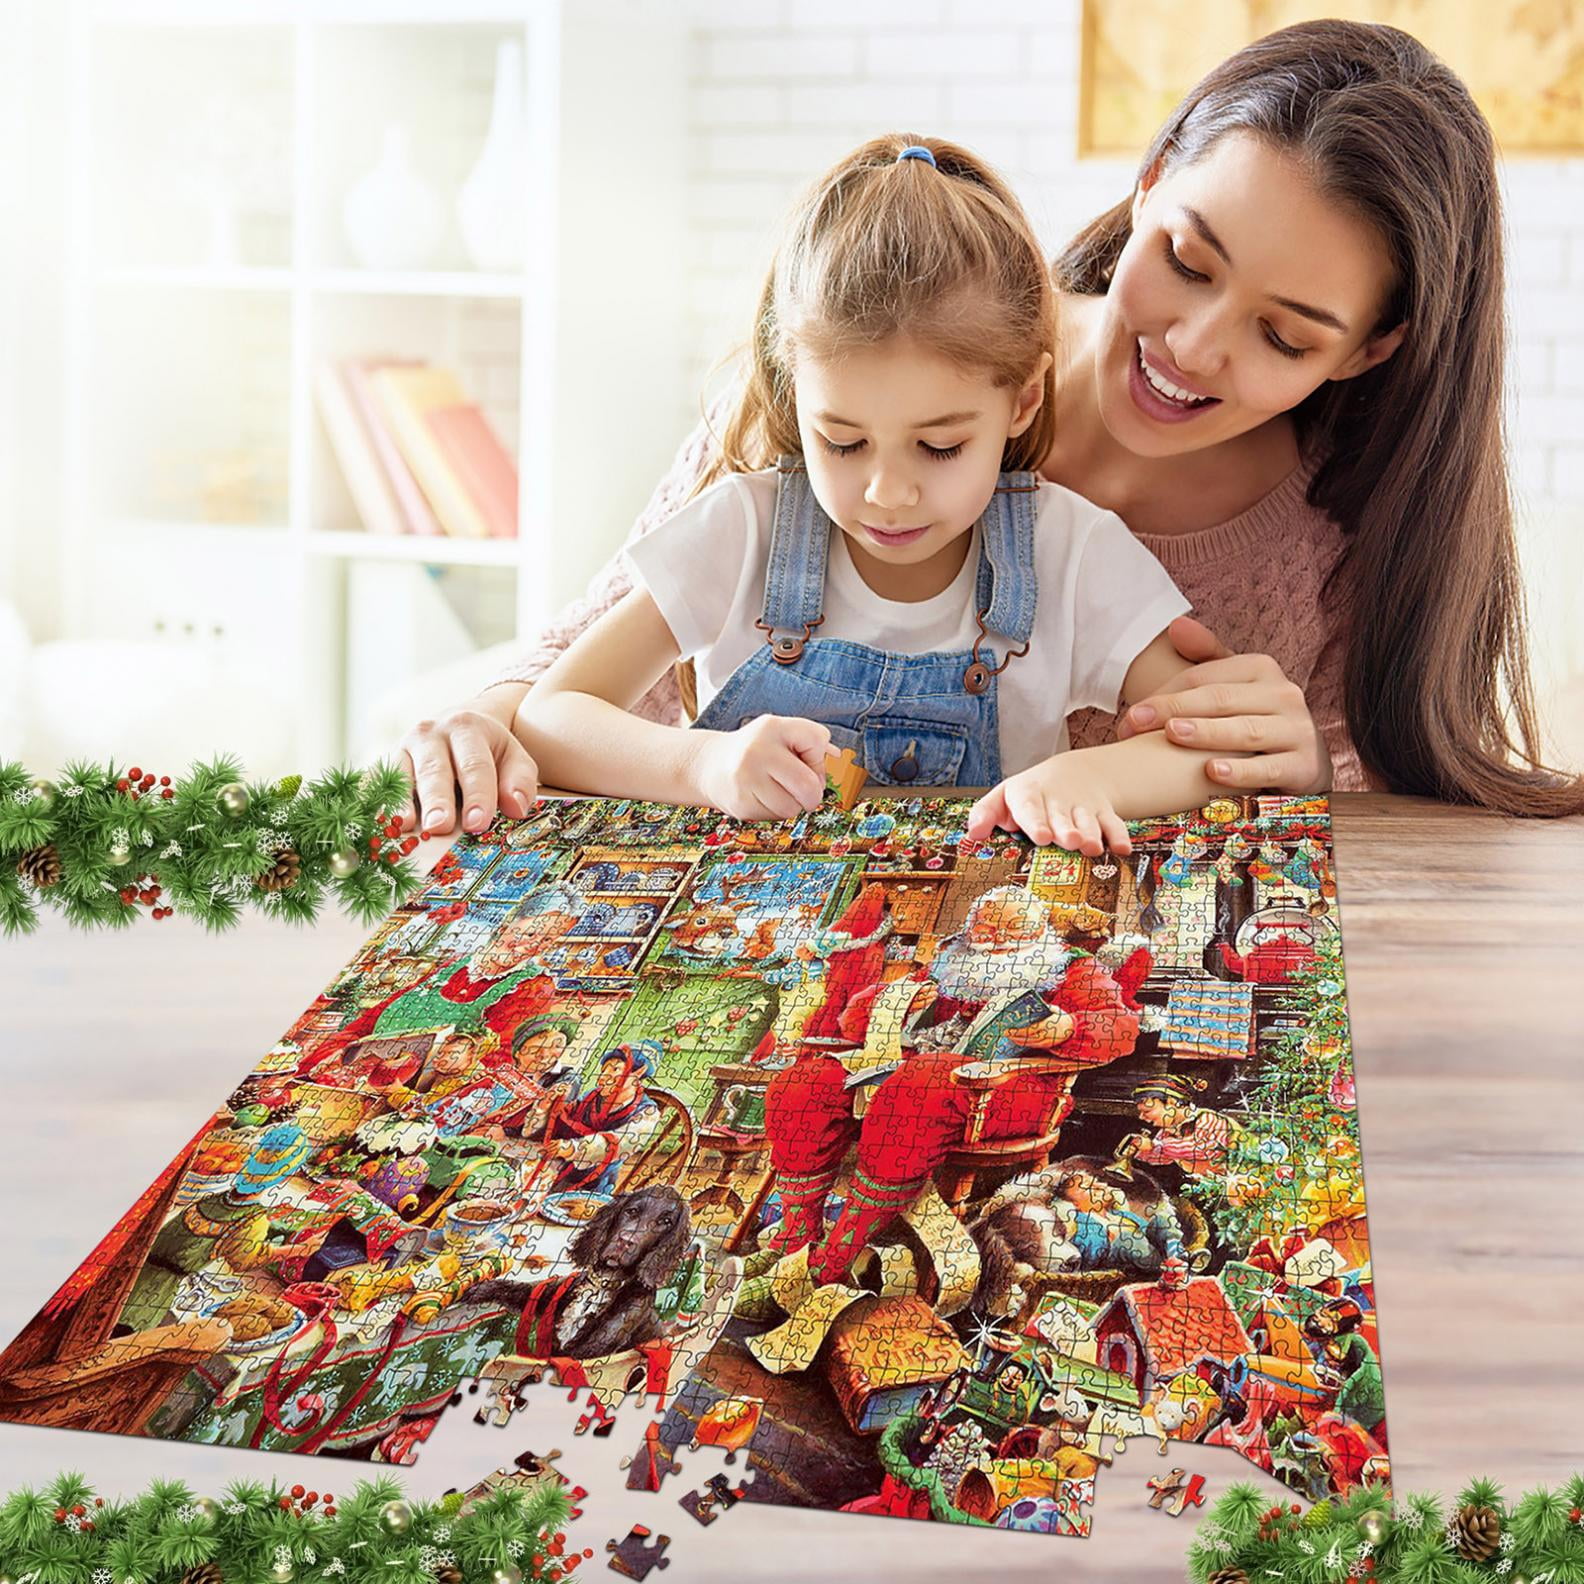 1000 Pieces Jigsaw Puzzles for Adults Teen Dog Collection Jigsaw Puzzle jigsaw puzzles for adults for Adults and Kids Family play,Puzzle Present & Gift for Adults